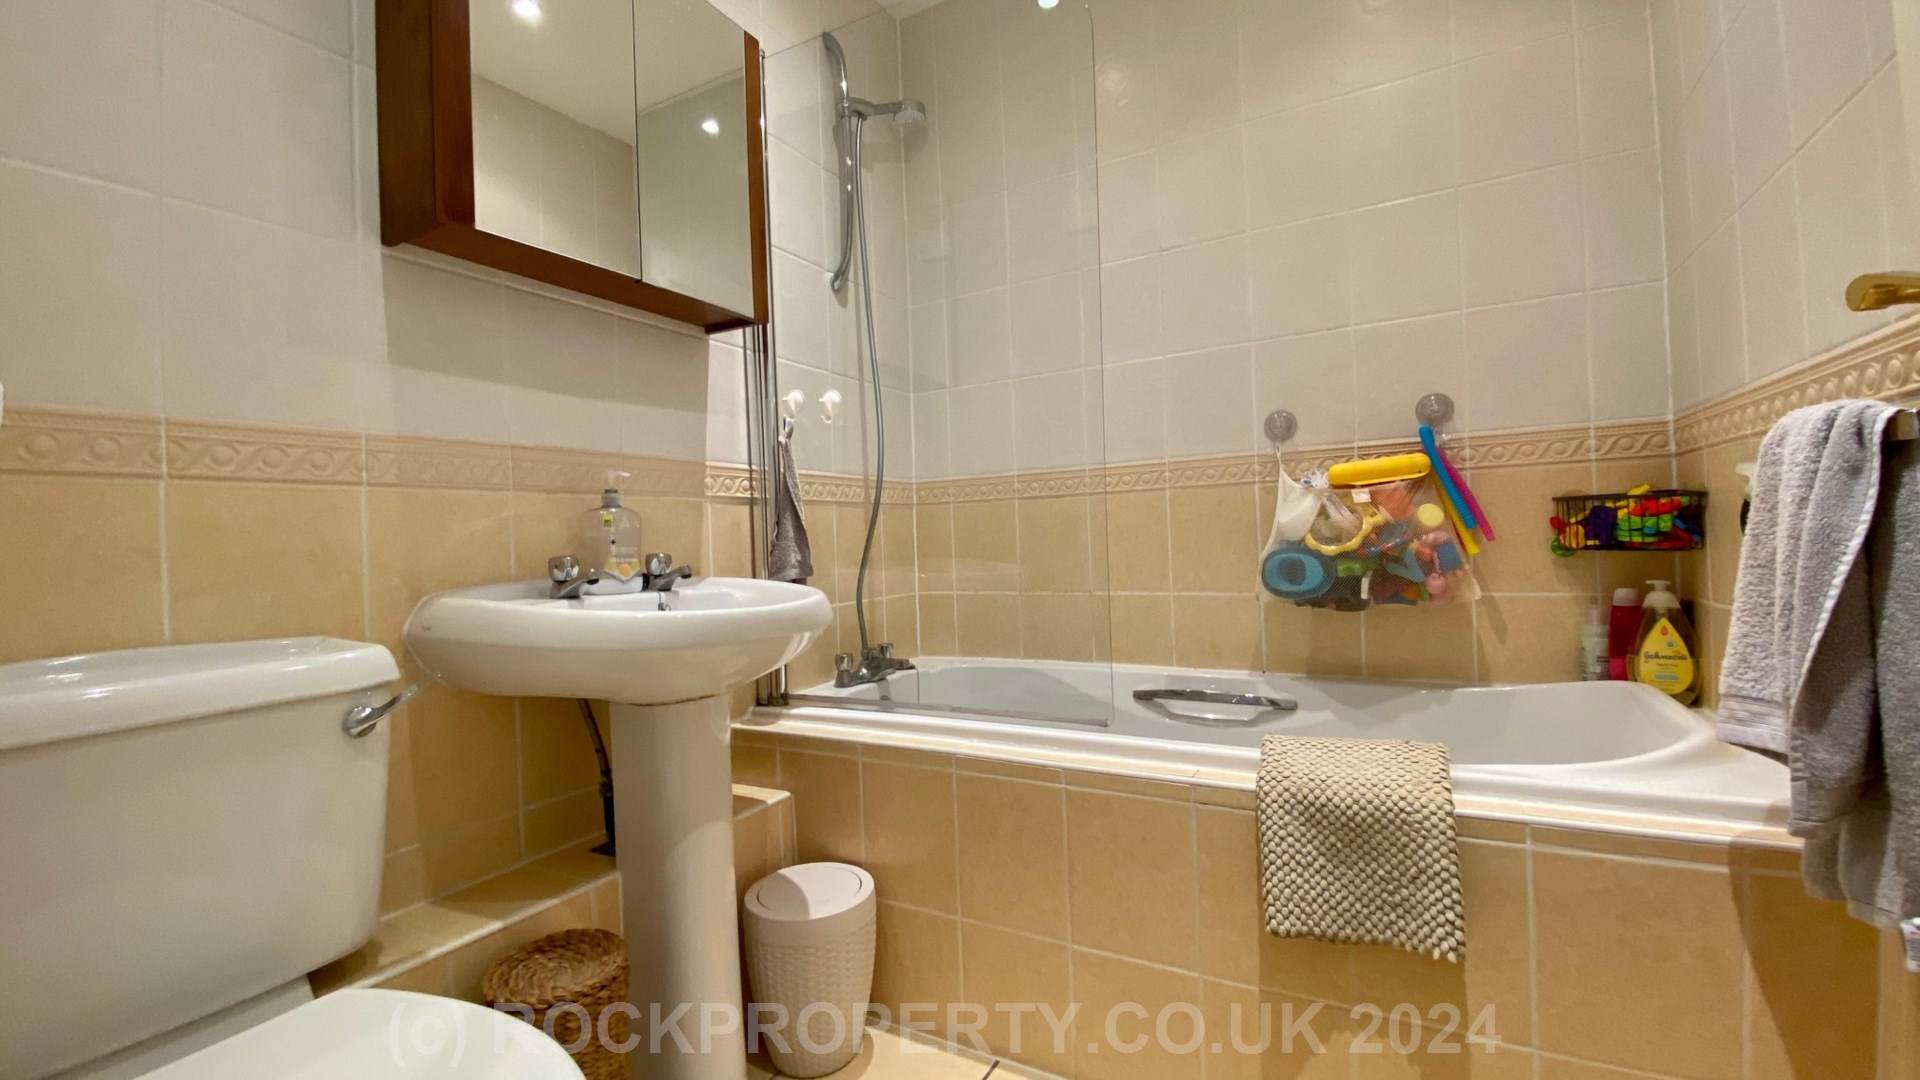 SPACIOUS 2 BED + BALCONY, Woodville Apartments, St Saviour's Road, Image 16